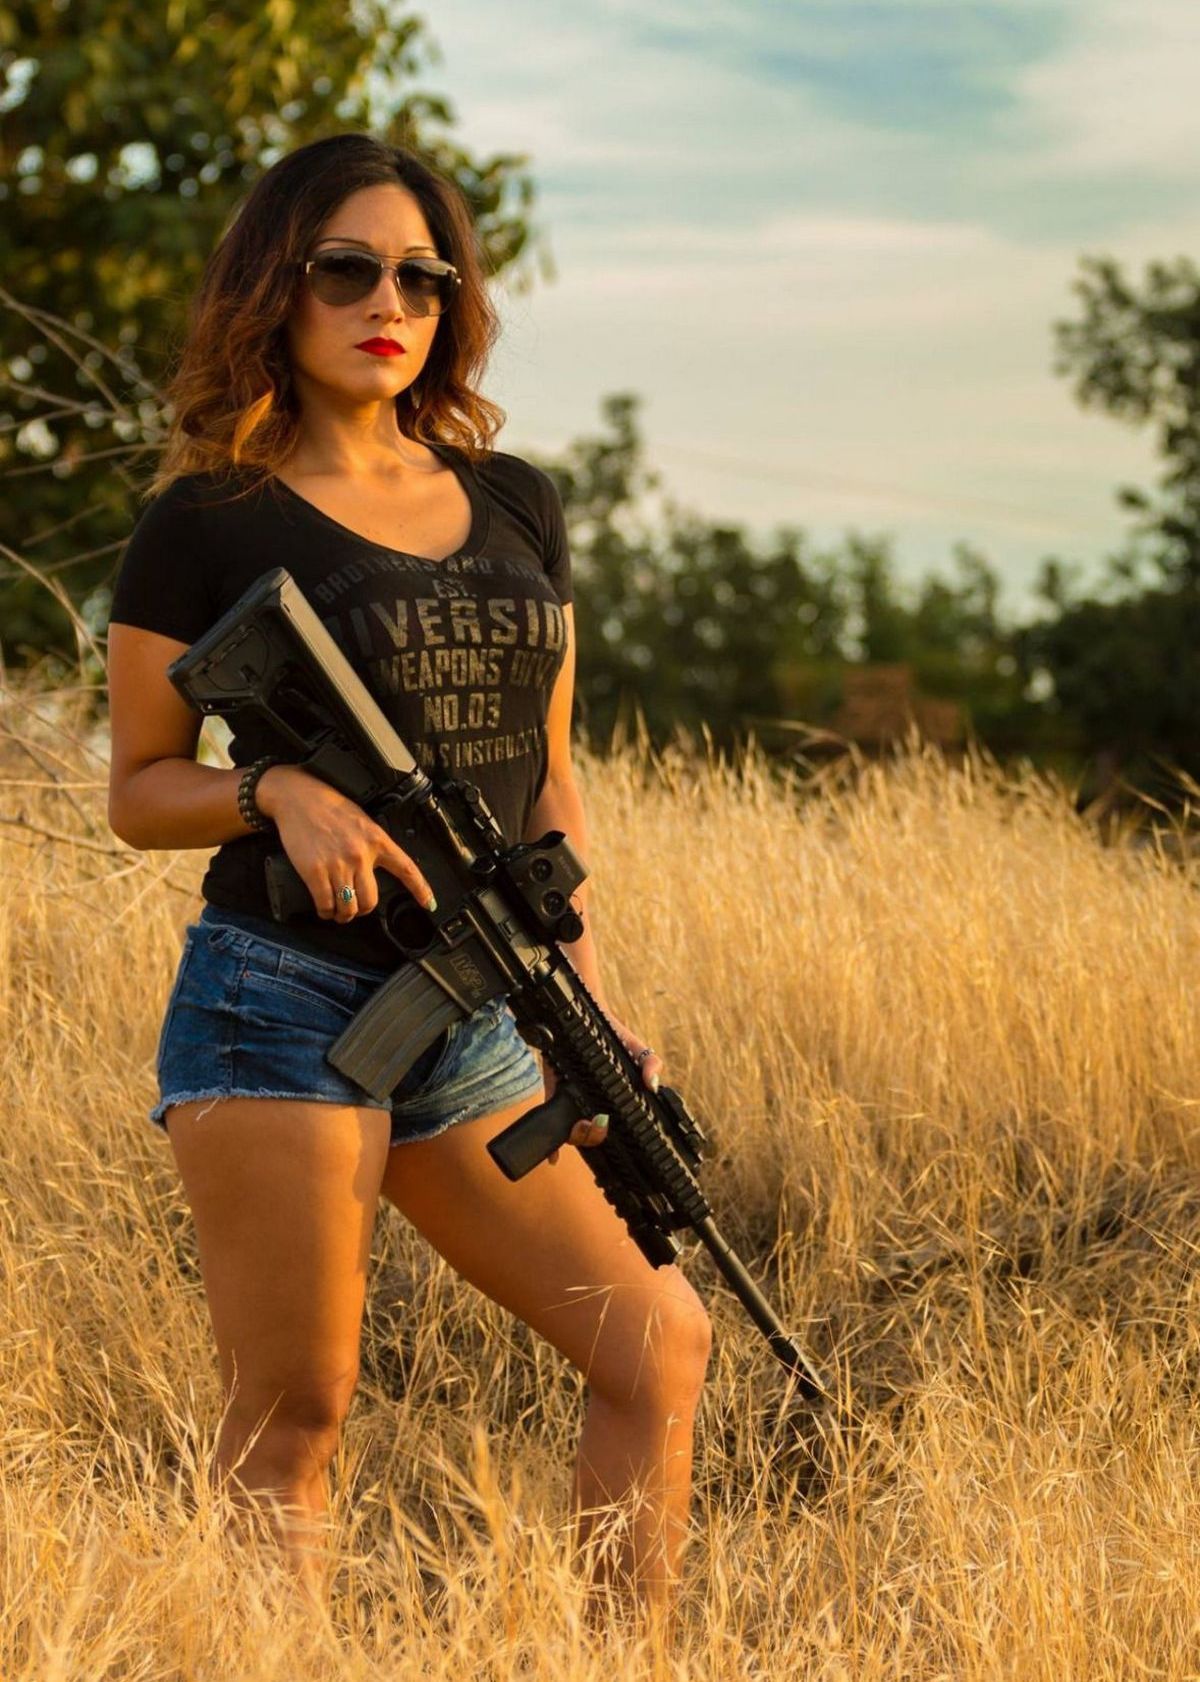 WOMEN WITH WEAPONS...8 84lFpvWJ_o